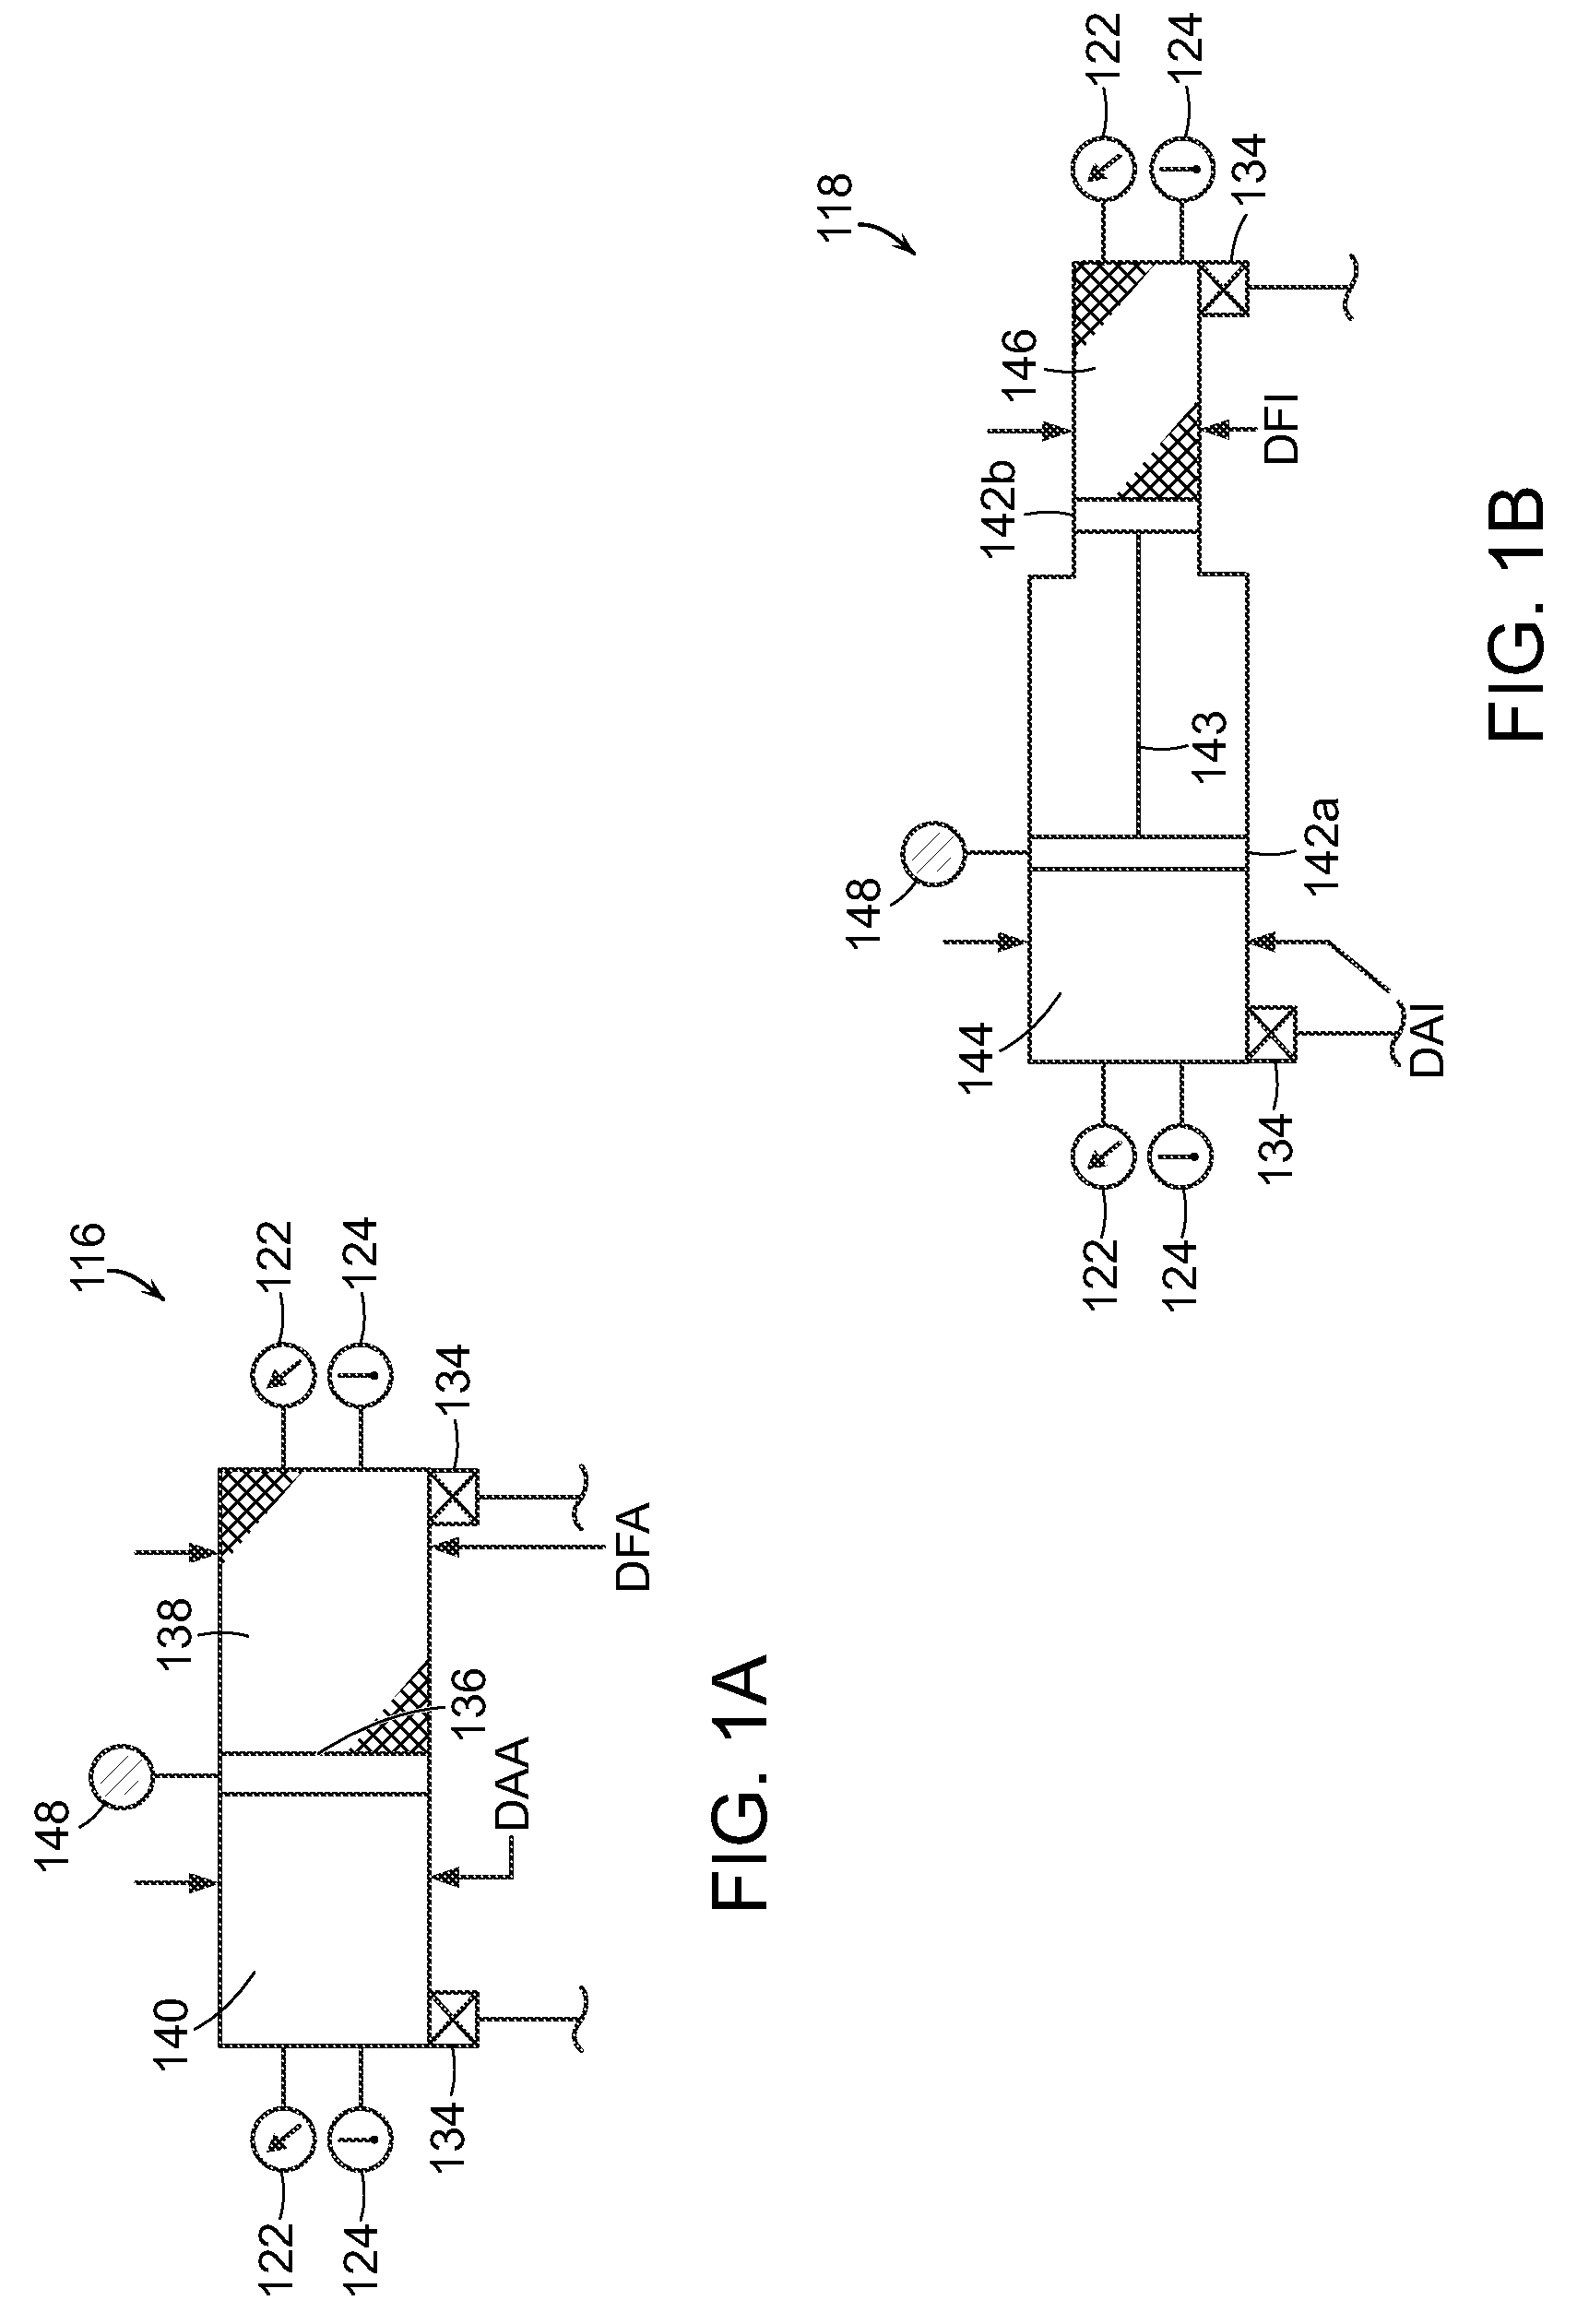 Systems and methods for energy storage and recovery using compressed gas